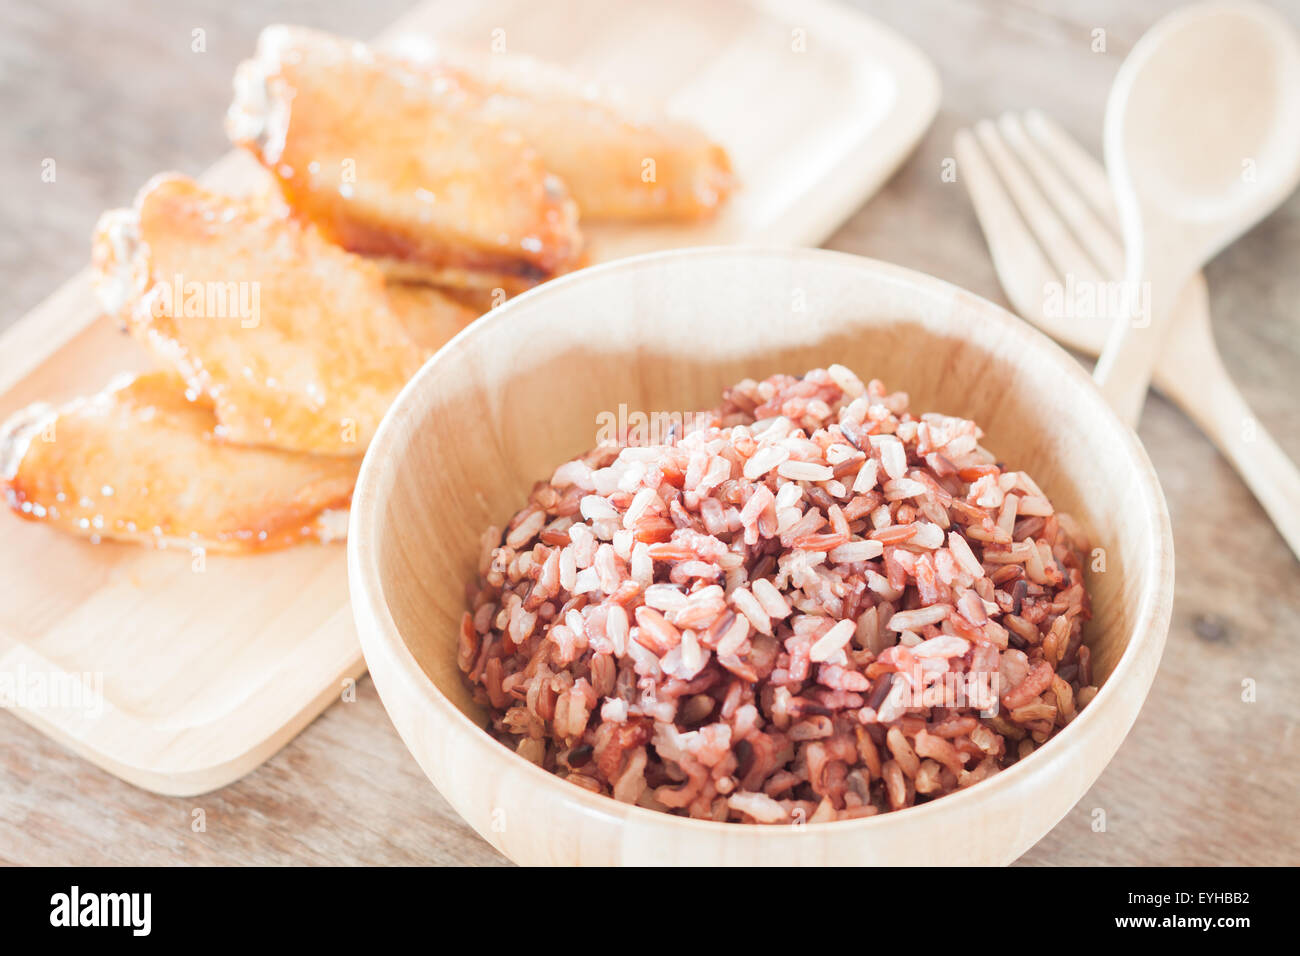 Multi grains berry rice with grilled chicken wings, stock photo Stock Photo